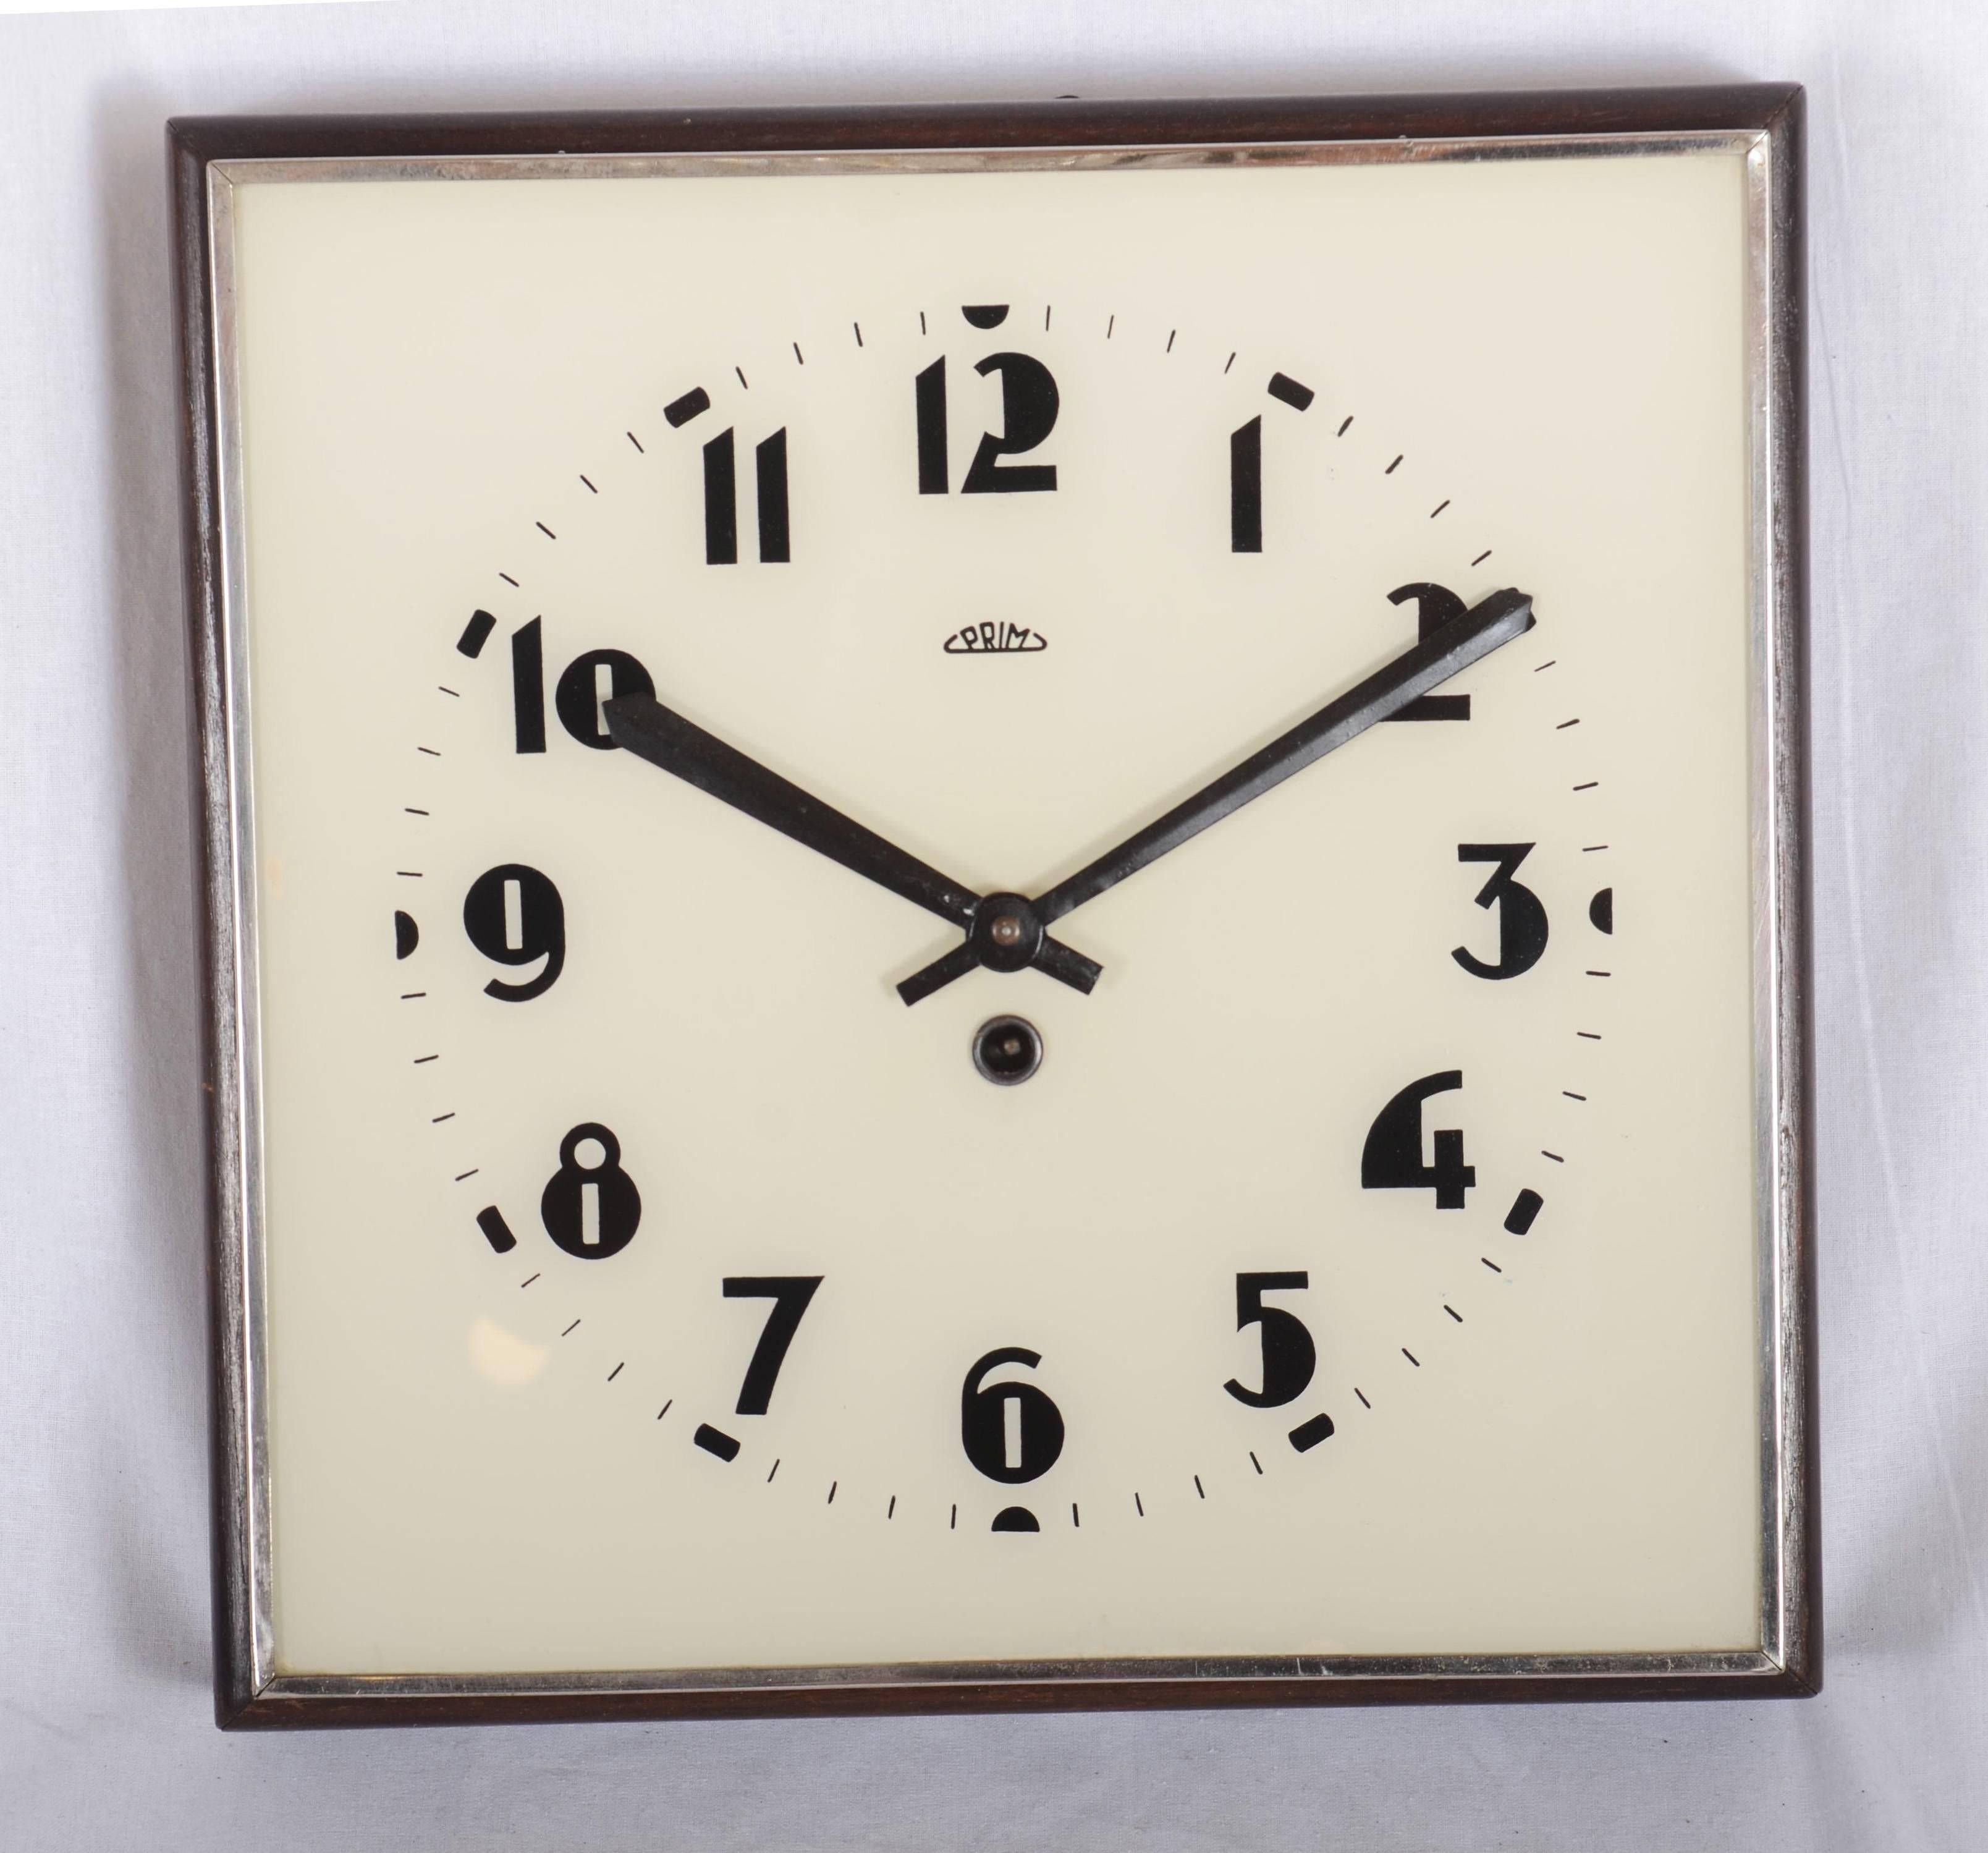 Wooden frame with white glass and black digits caught in steel, made by Prim in the 1930s. The original movement ware changed to an electric one powered by a small battery. Delivery time 2-3 weeks.